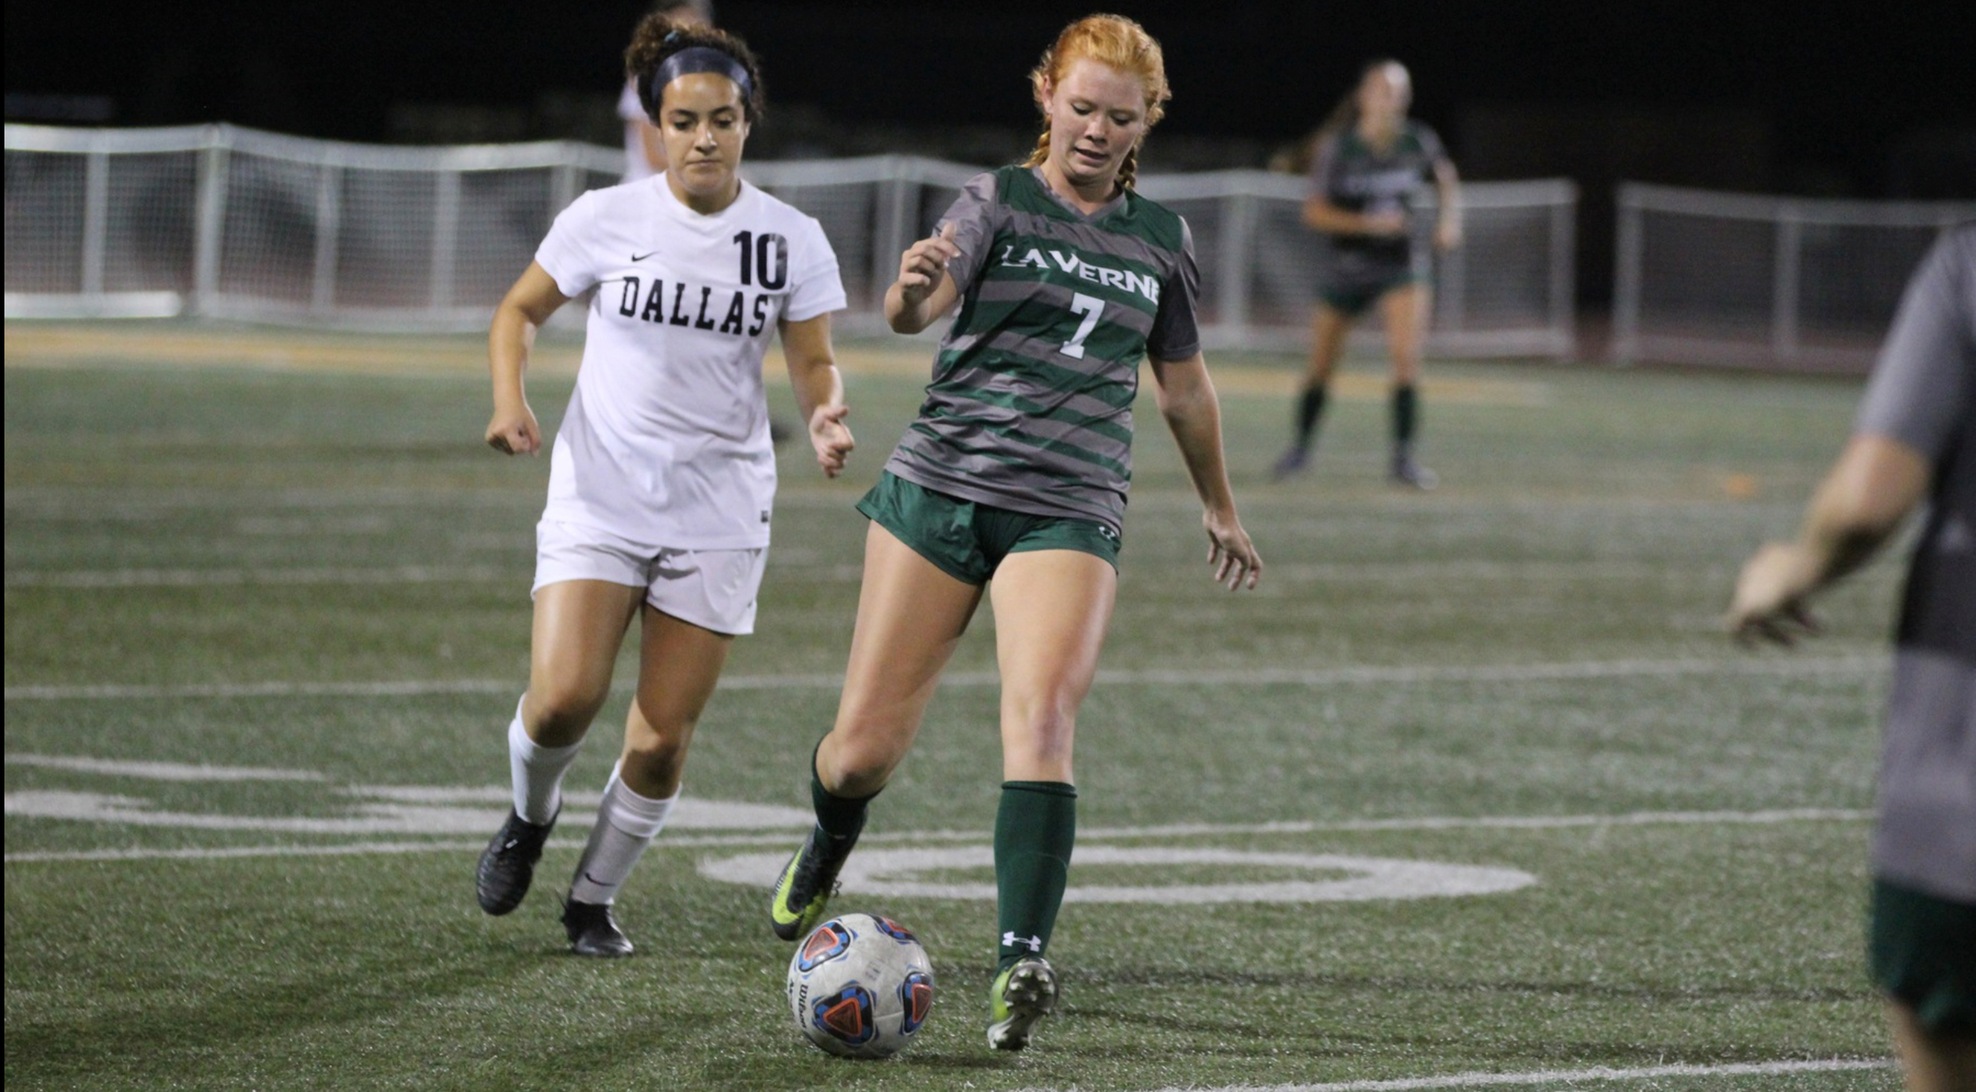 Women's soccer drops close match to North Central